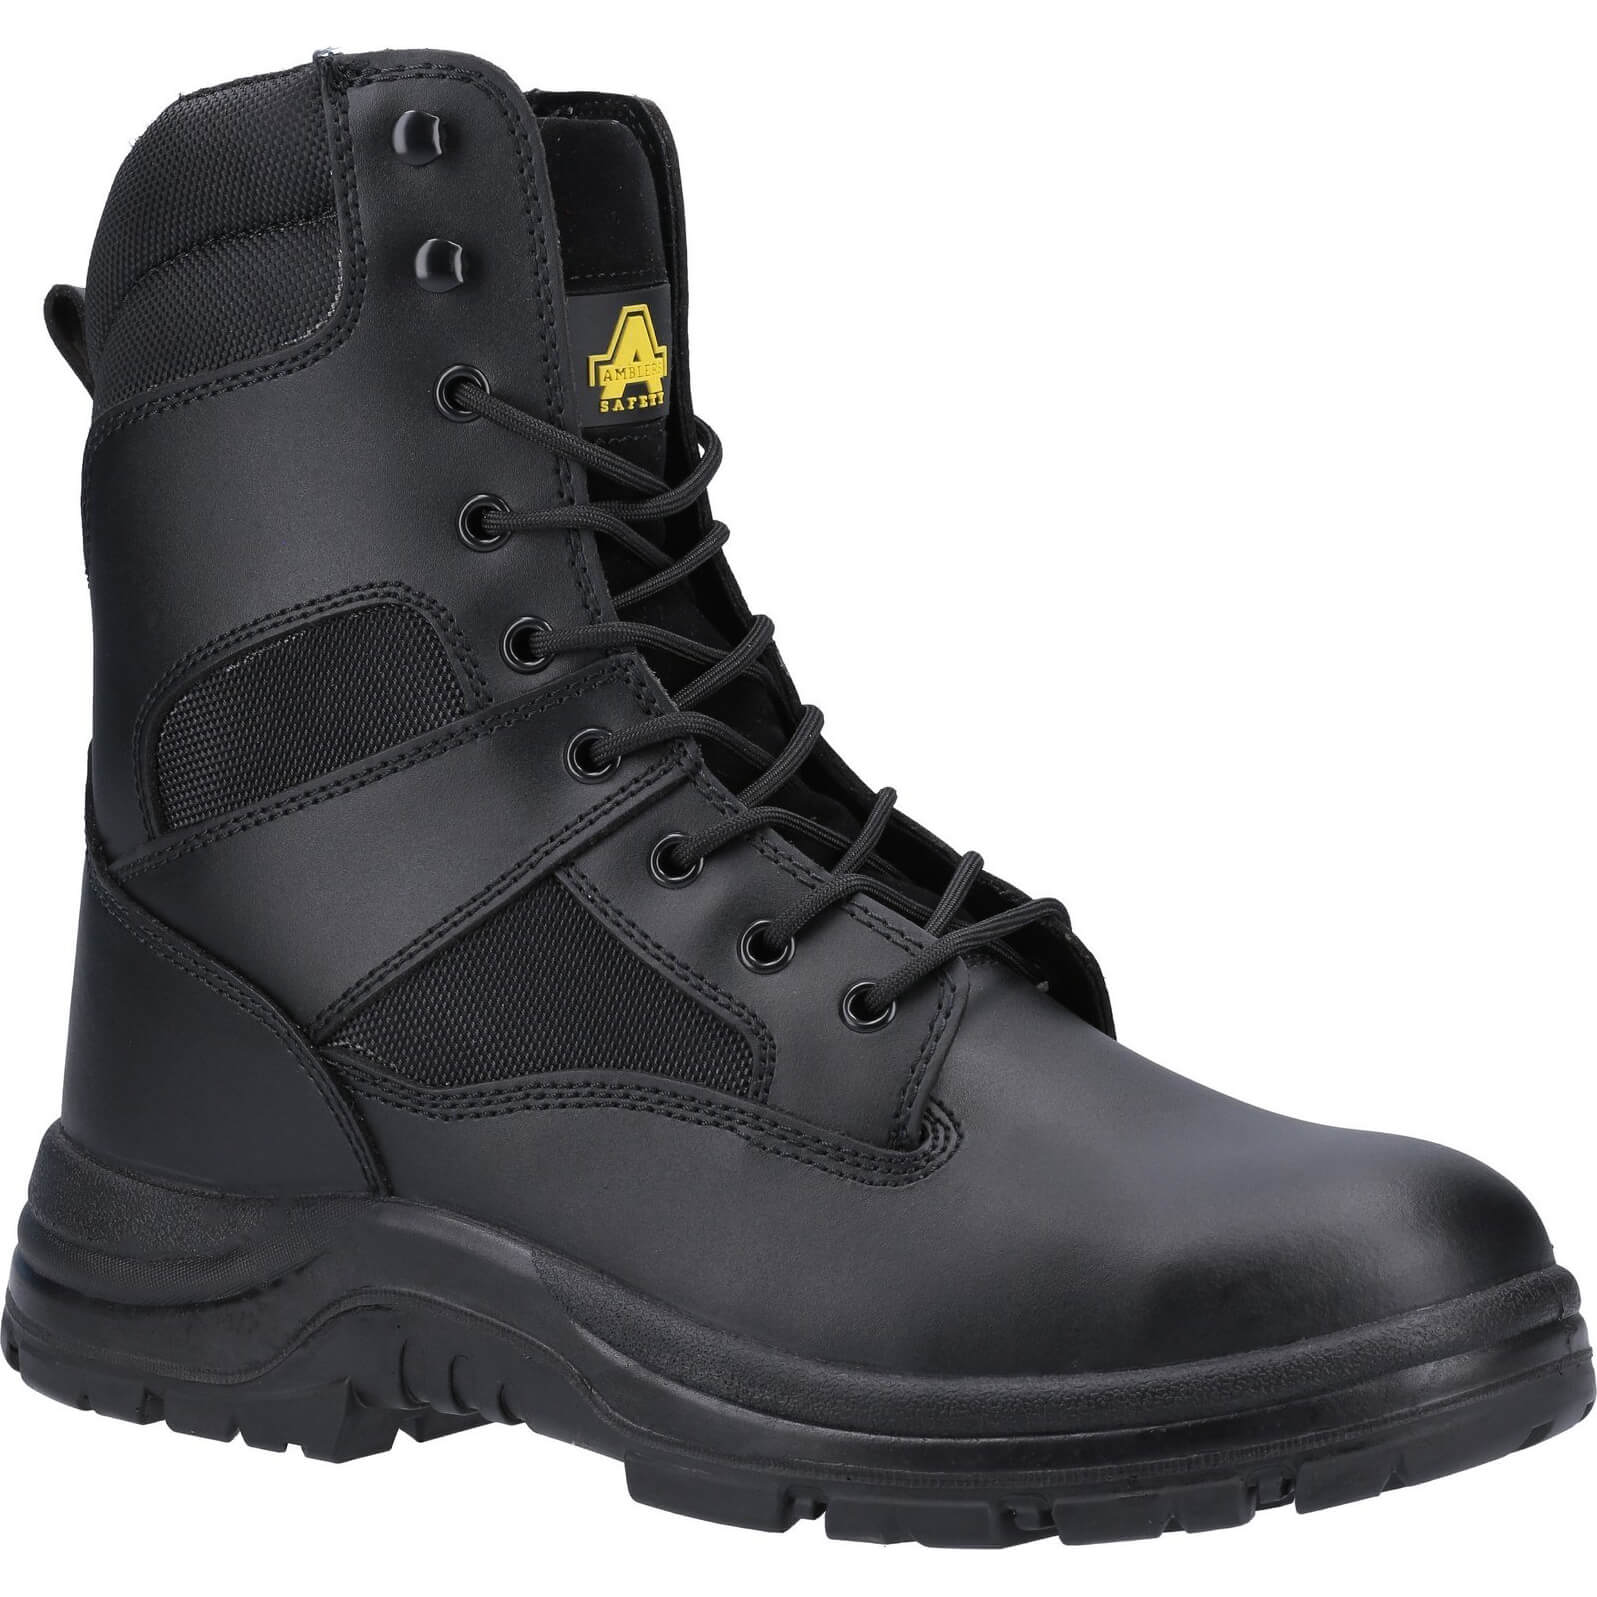 Photo of Amblers Mens Safety Fs008 Water Resistant Hi Leg Safety Boots Black Size 7